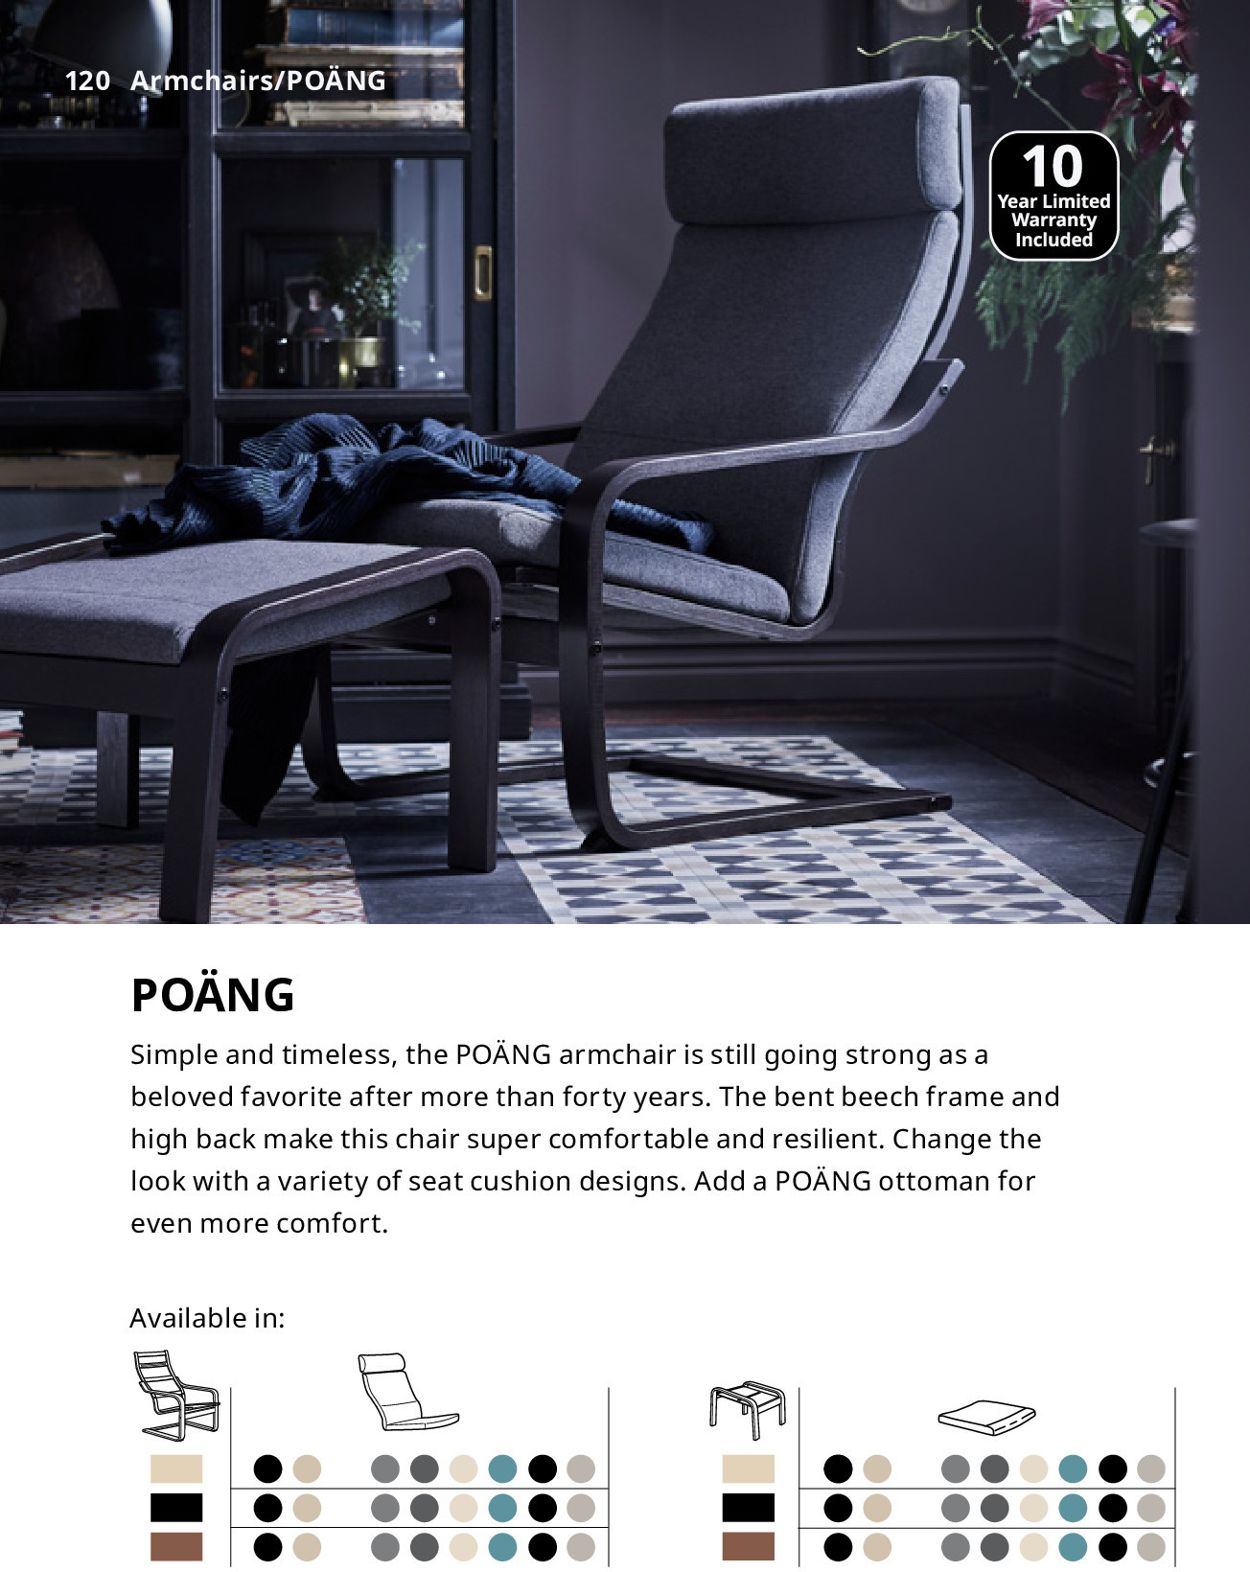 IKEA Current weekly ad 07/01 - 03/31/2022 [120] - frequent-ads.com